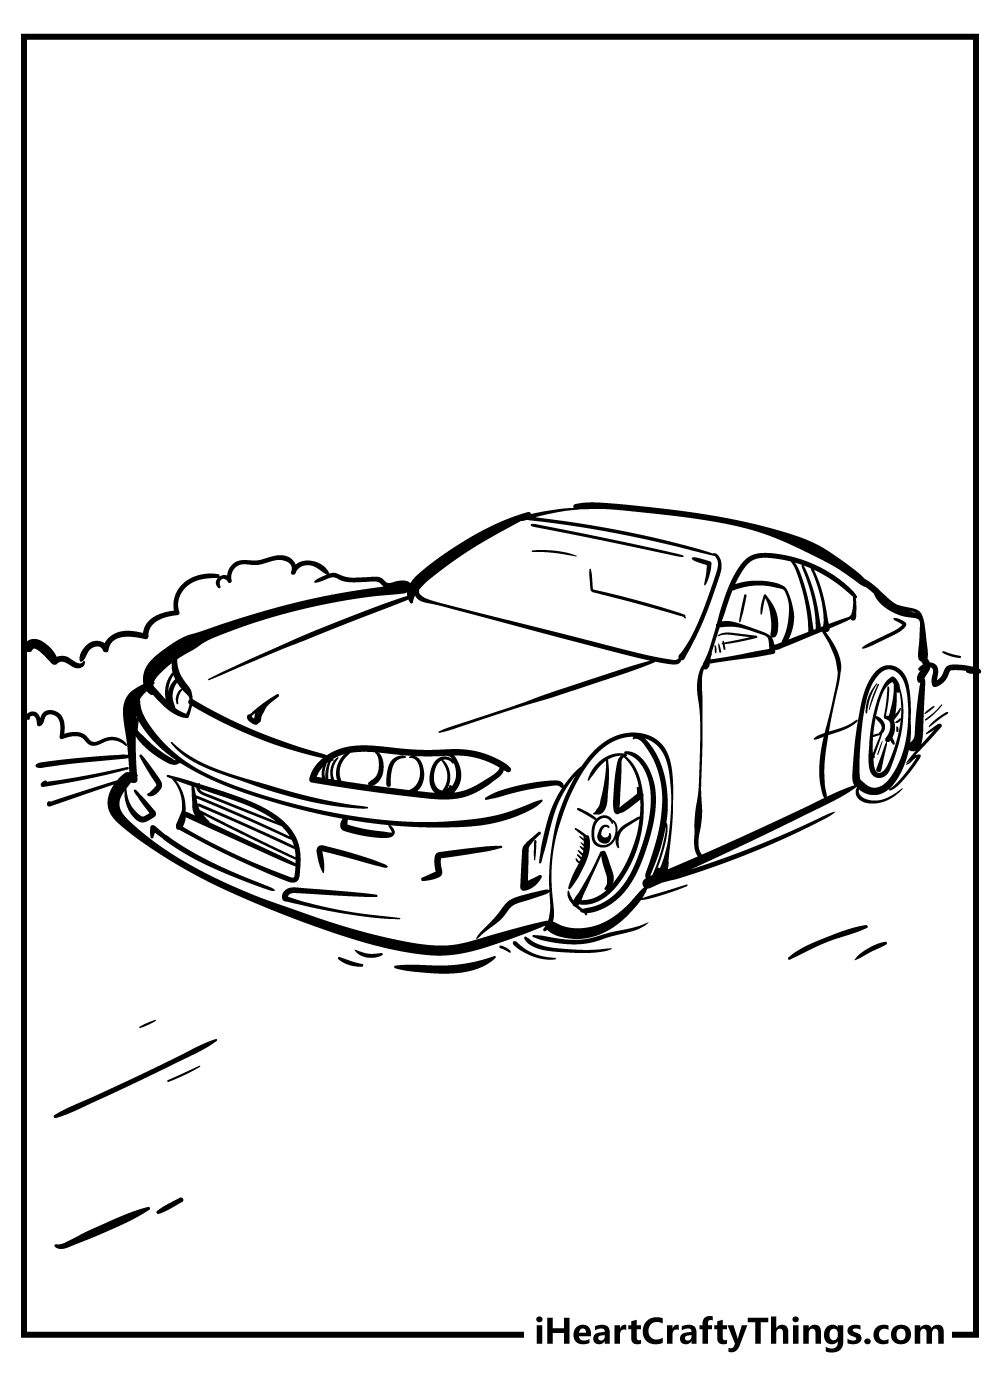 Cool Car Coloring Pages - 100% Original And Free (2023)